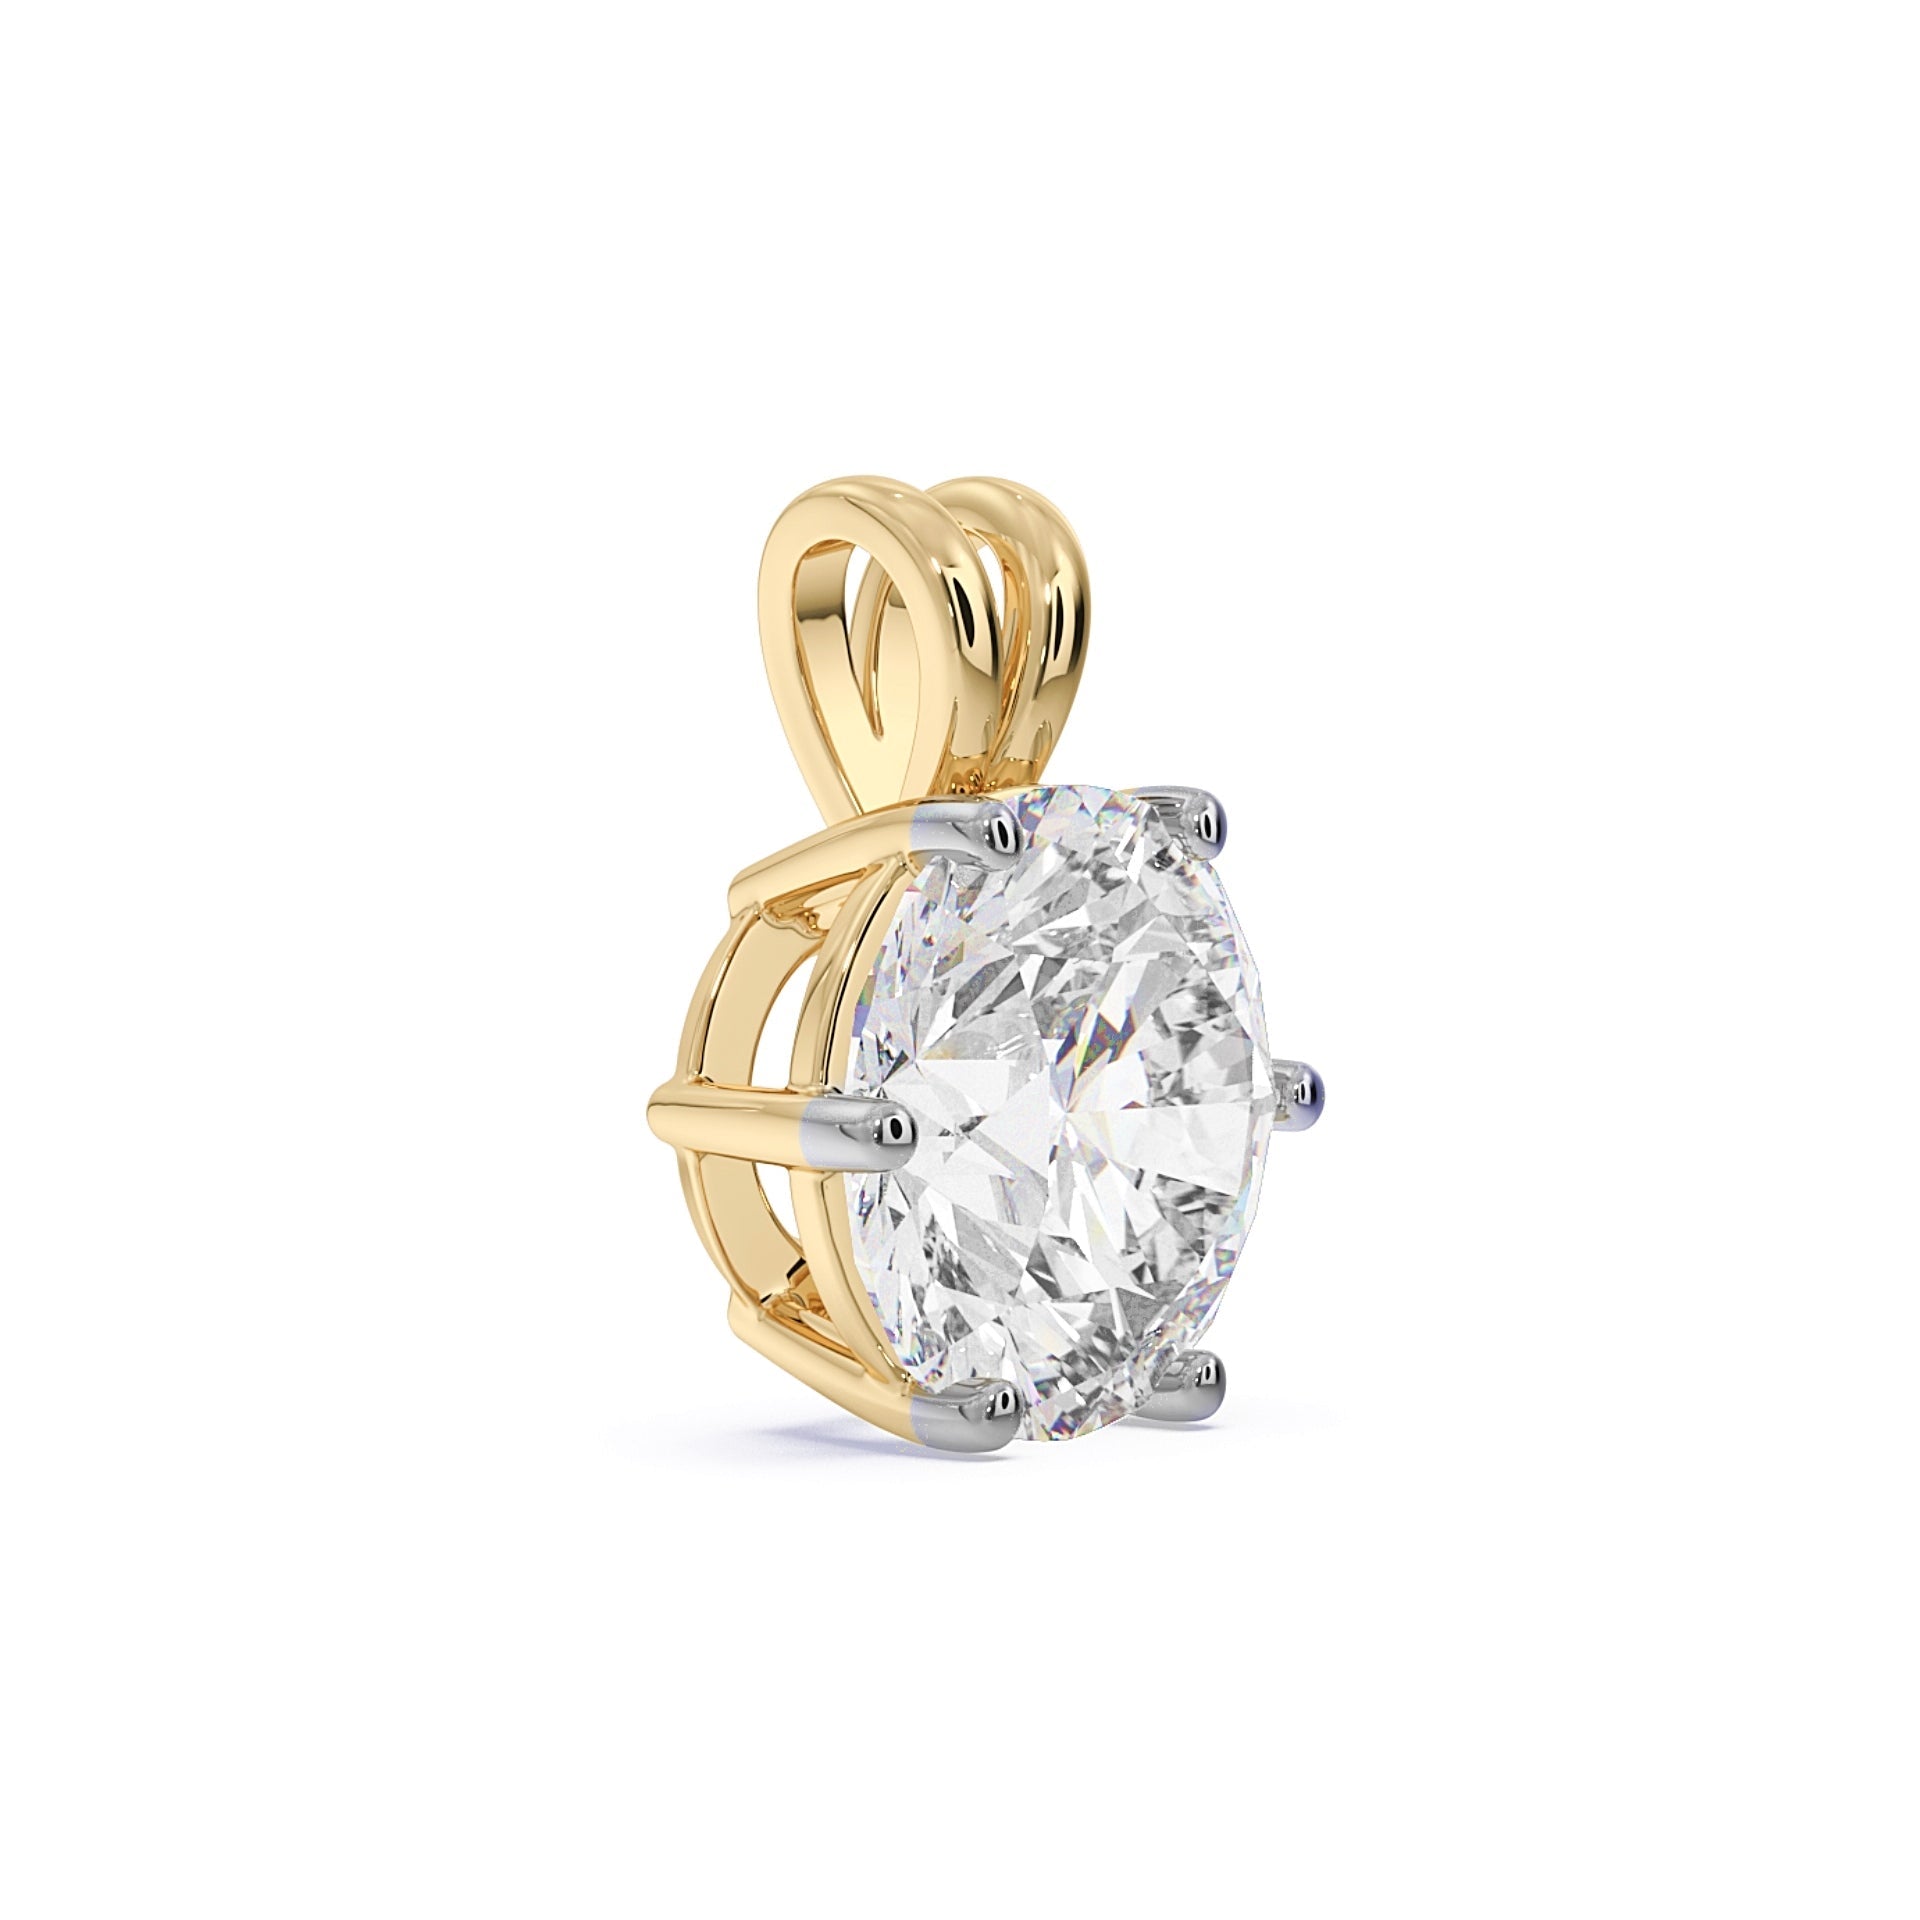 Side view of MYZA 3 carat IGI certified lab-grown diamond Pendant for women delicately set in secure six-prong settings crafted in 18kt hallmark yellow gold.